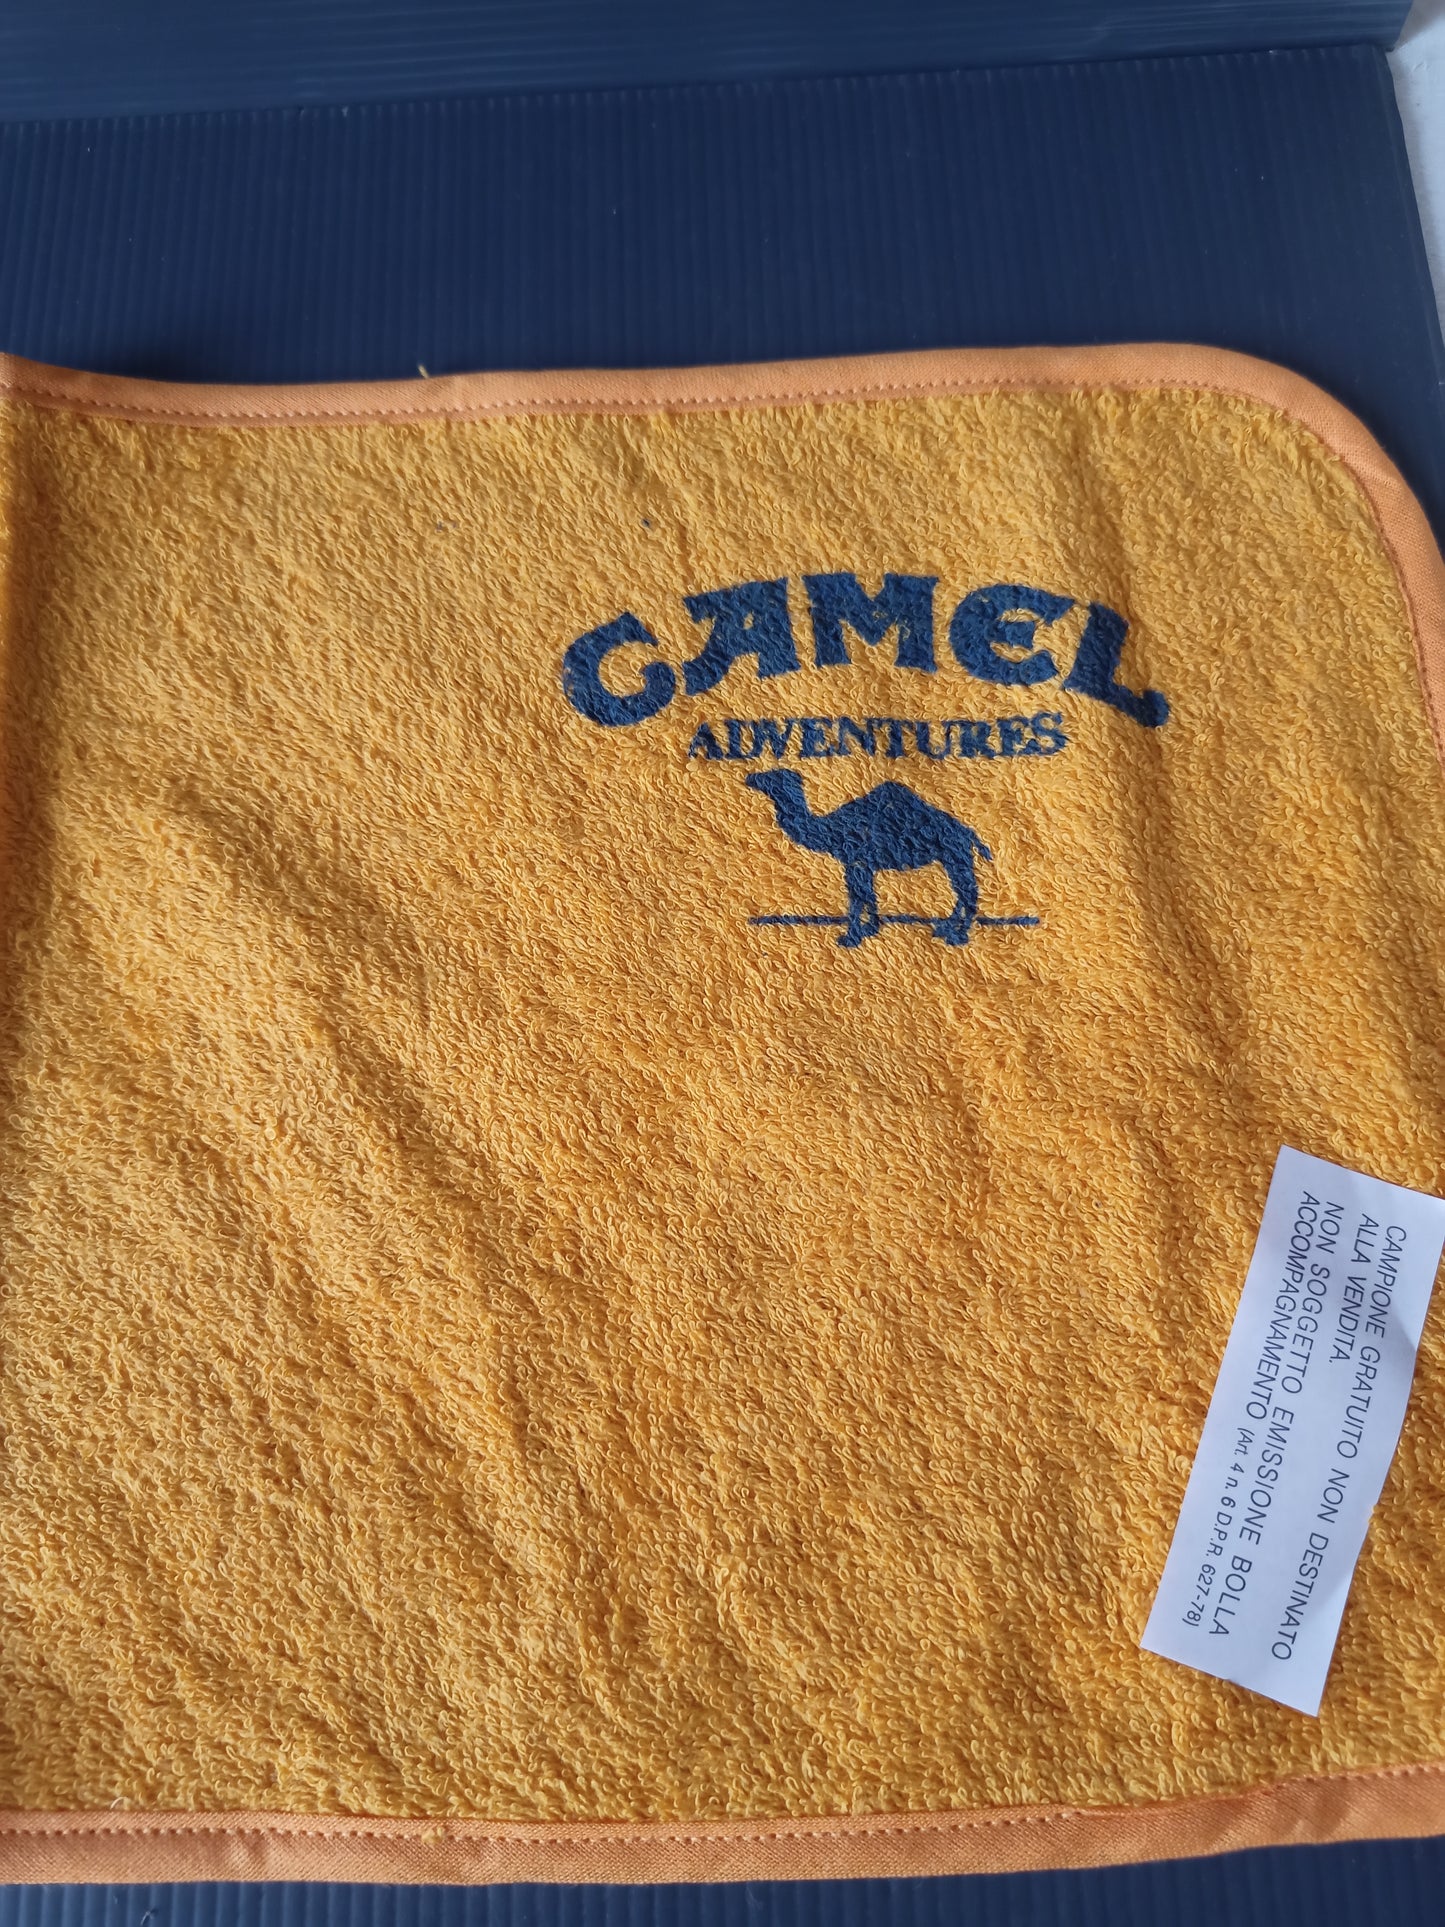 Gadget Camel placemat, original from the 80s